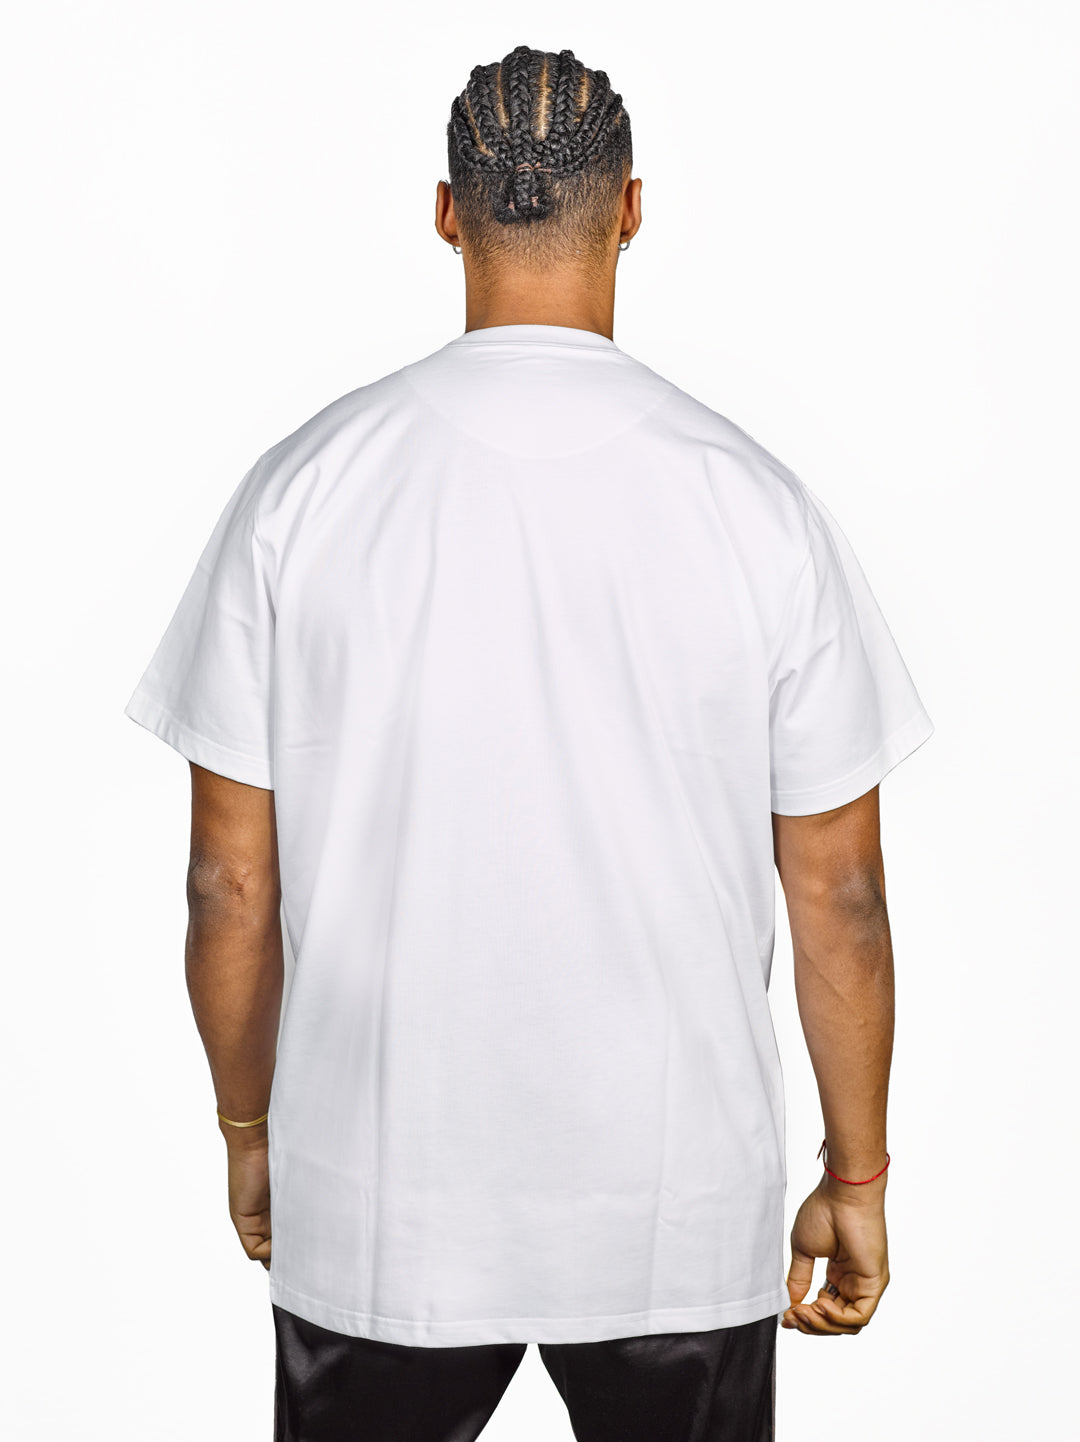 Exetees Big & Tall Comfort Round Neck T-Shirt - White